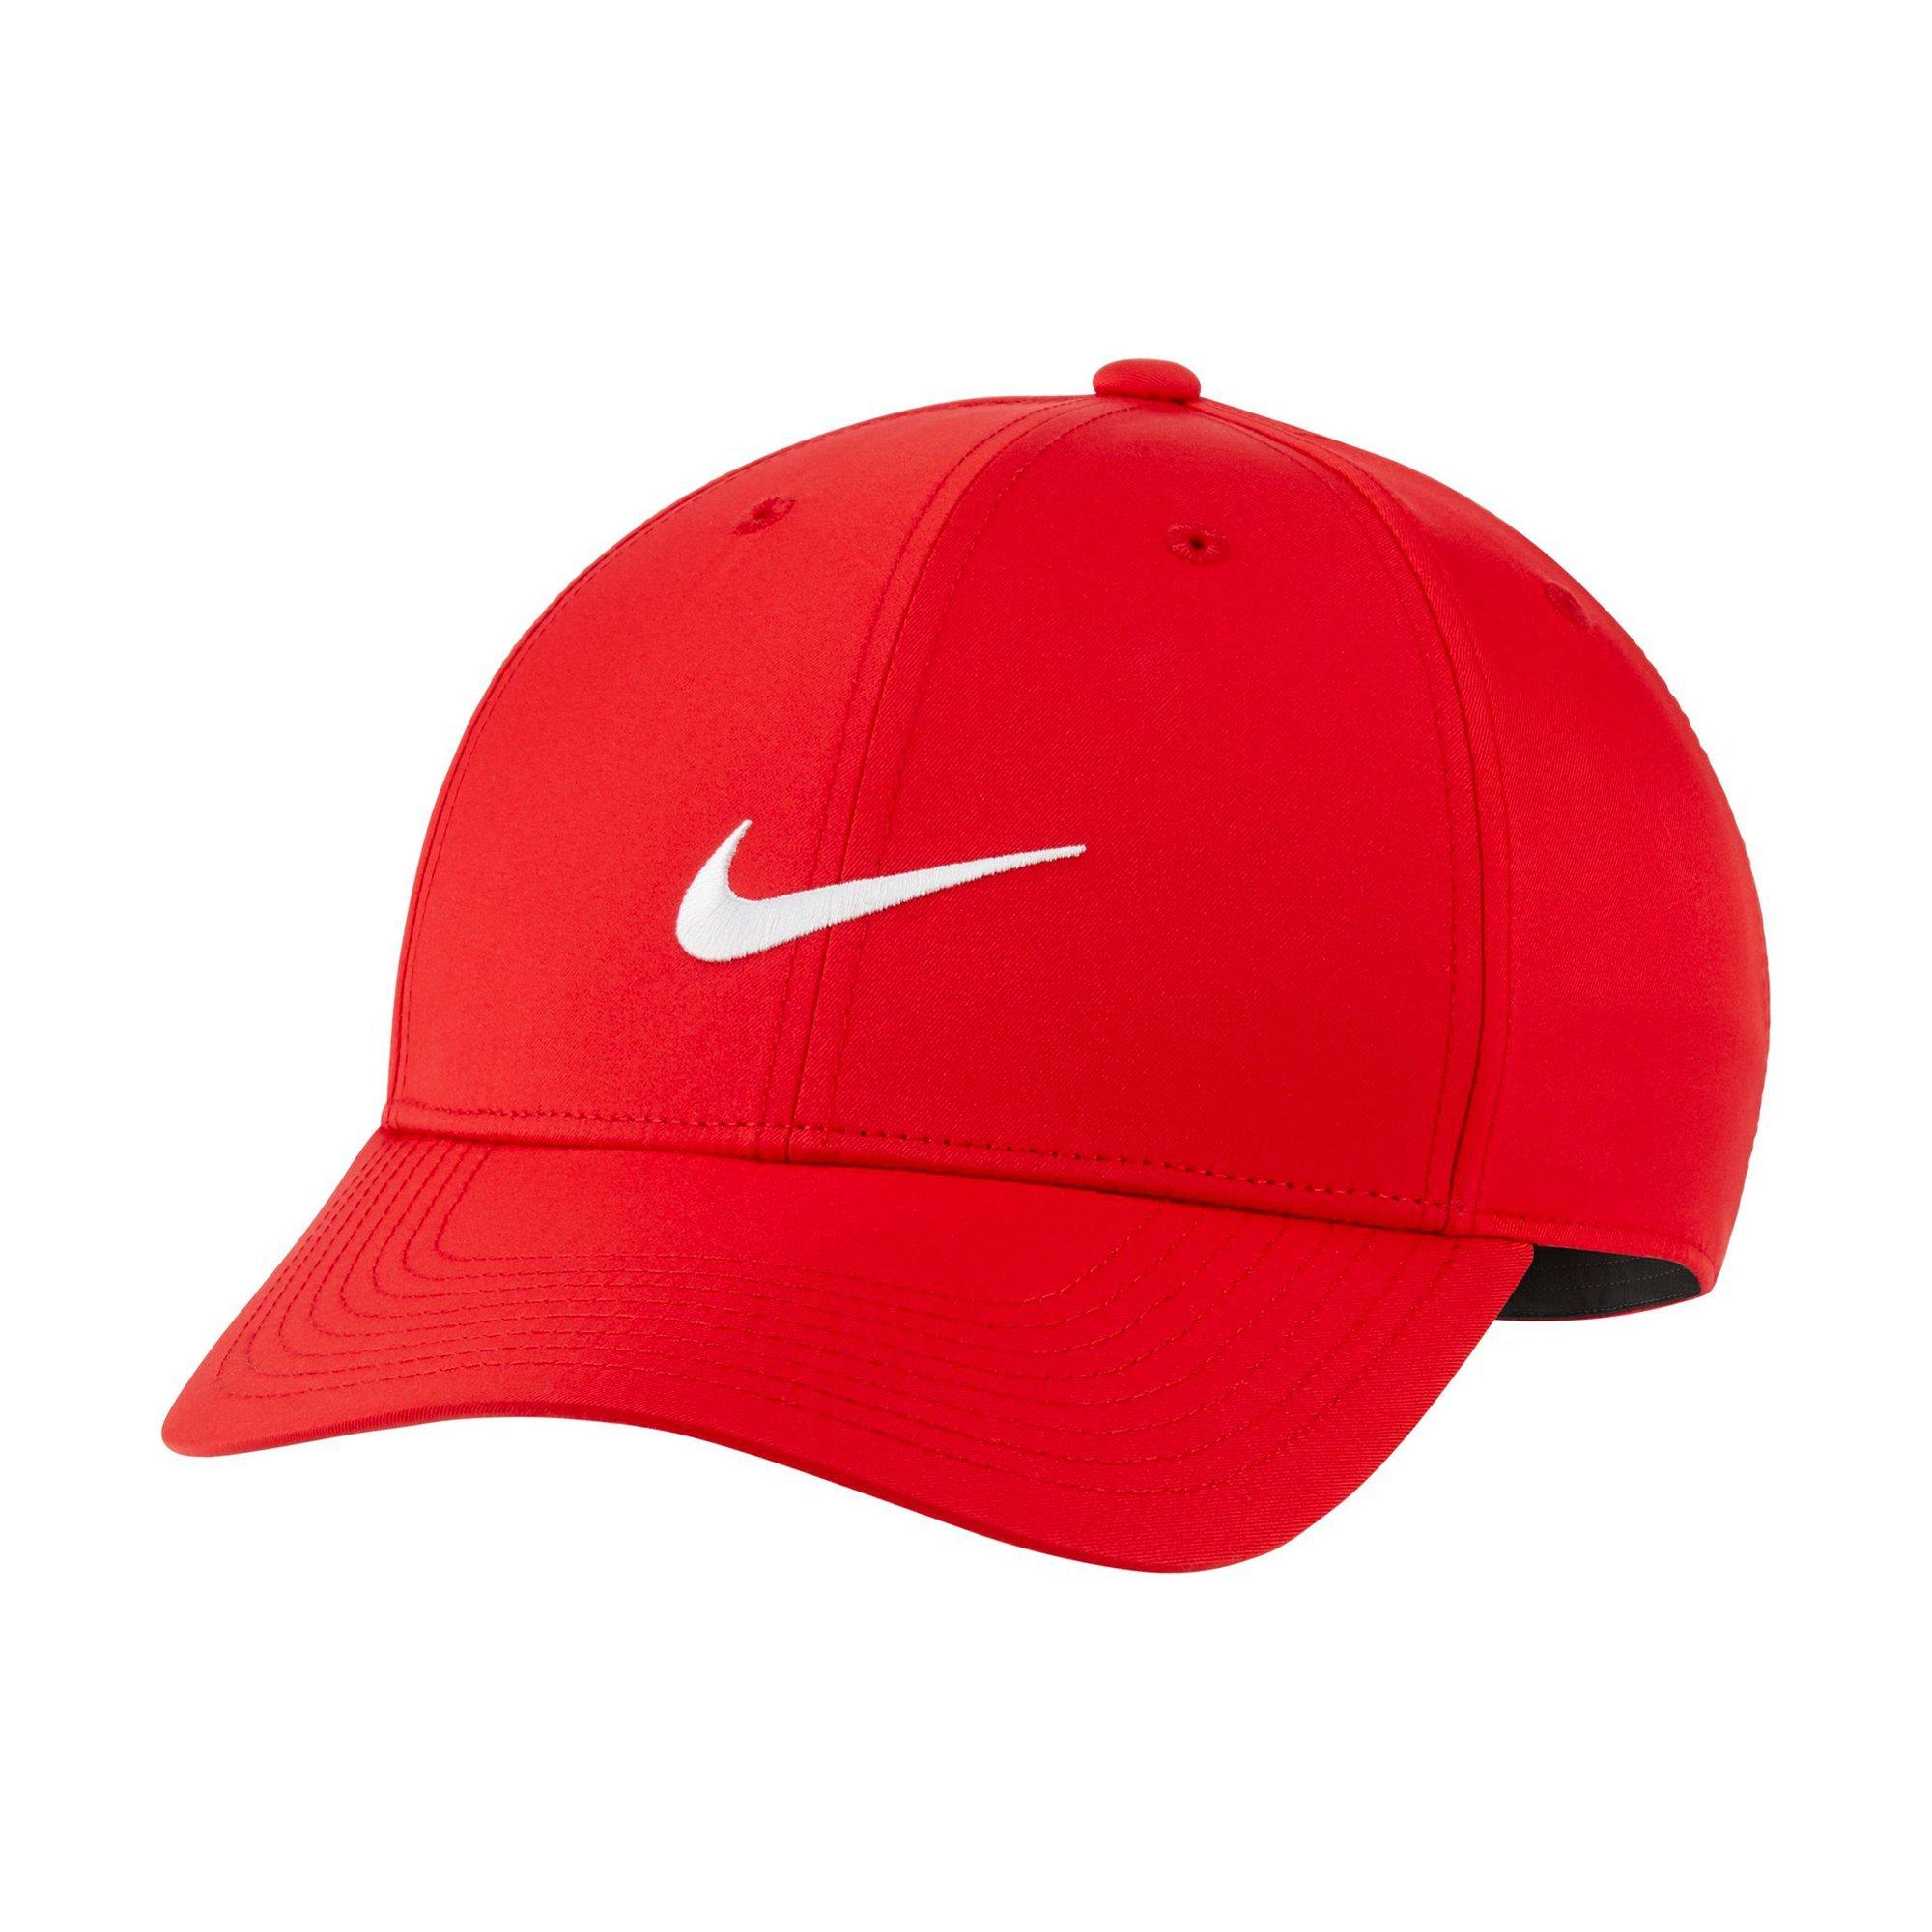 Nike Legacy91 Tech Adjustable Red